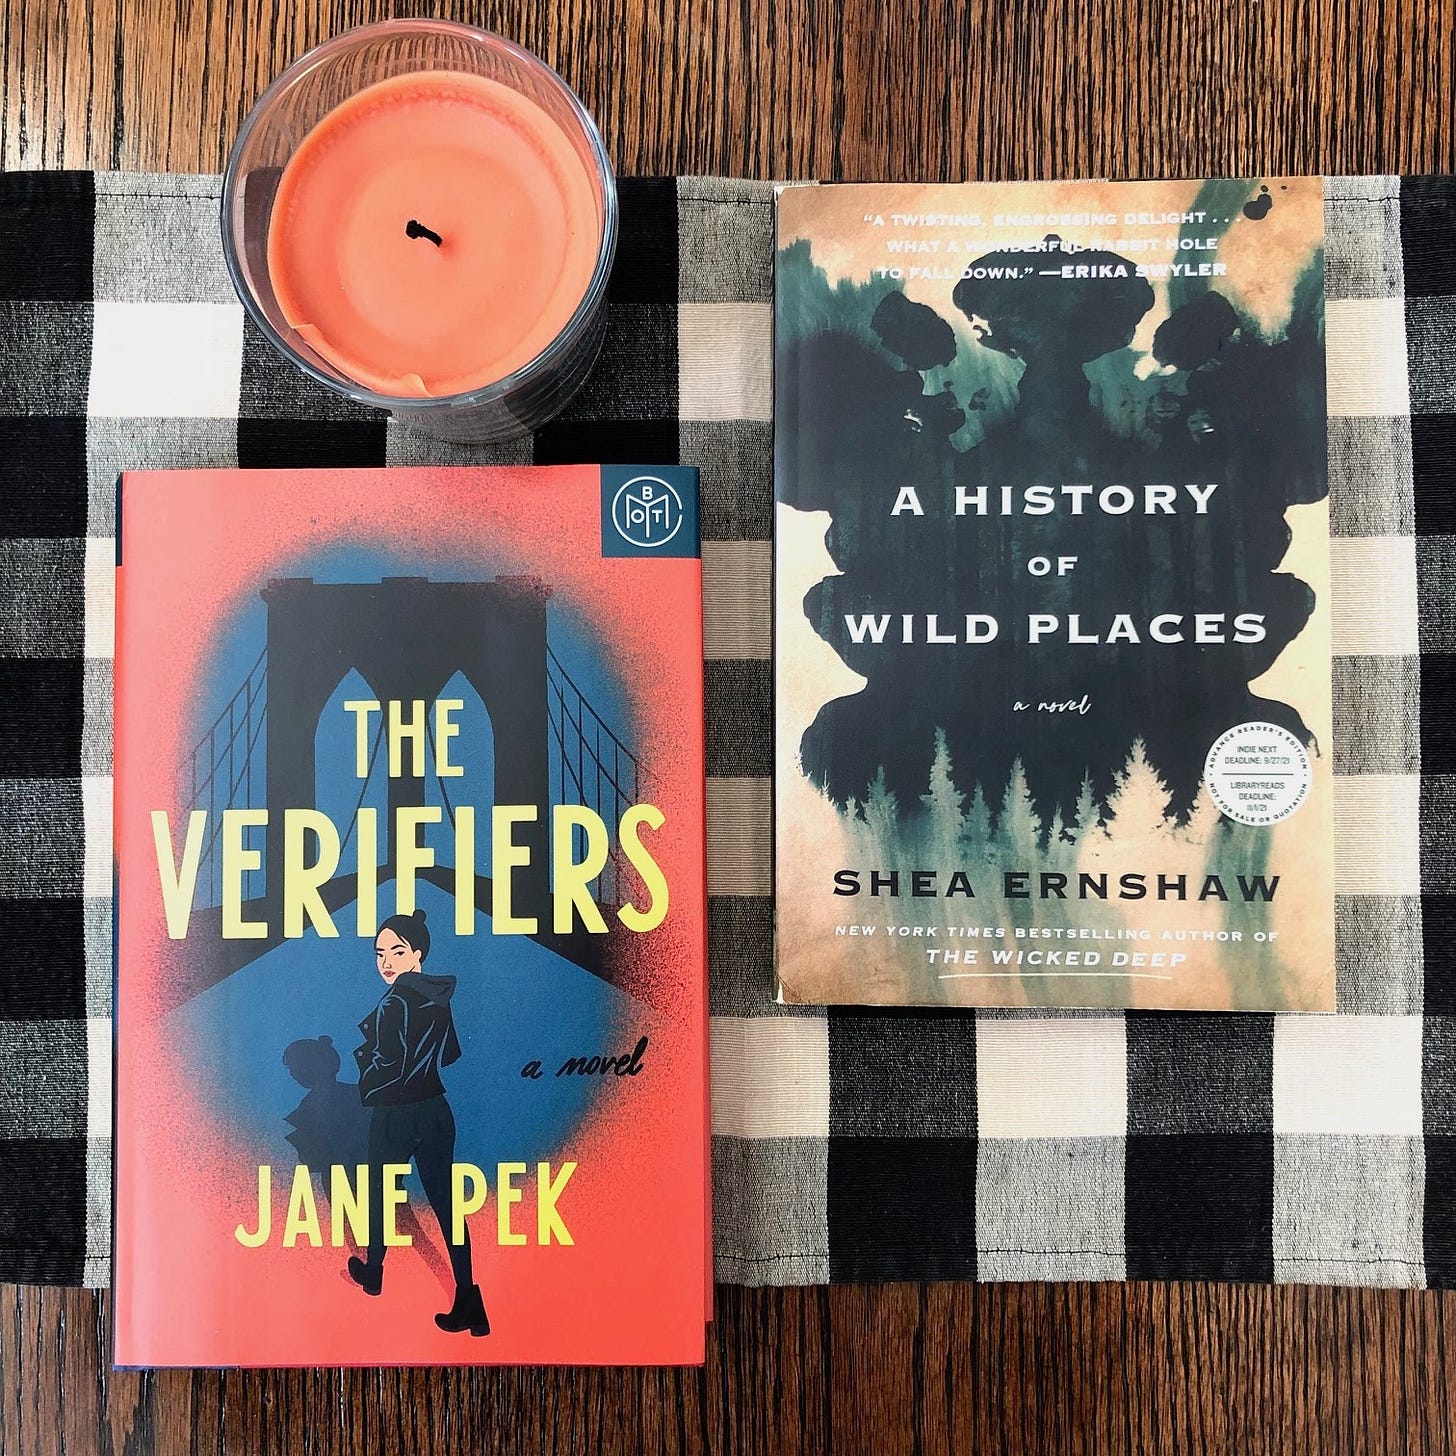 The books The Verifiers and A History of Wild Places, laying on a checked placemat on a wood table next to an orange candle. 